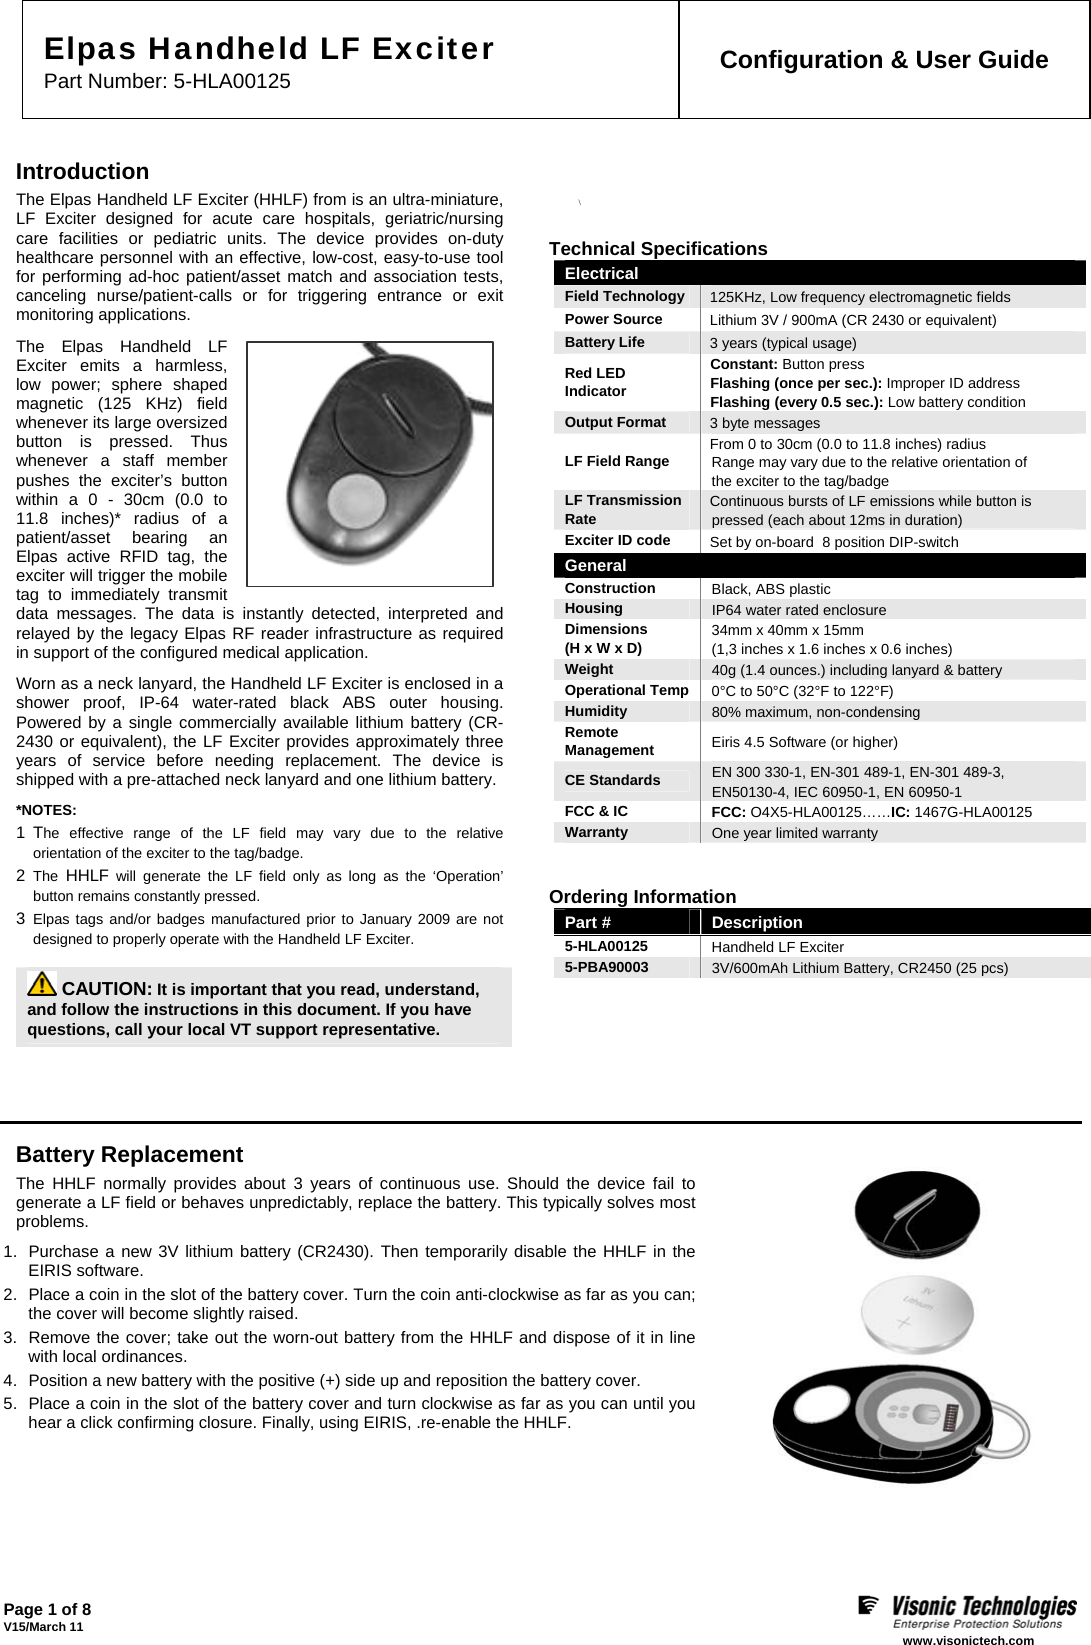 Page 1 of 8 V15/March 11    www.visonictech.com  Elpas Handheld LF Exciter  Part Number: 5-HLA00125  Configuration &amp; User Guide  Introduction The Elpas Handheld LF Exciter (HHLF) from is an ultra-miniature, LF Exciter designed for acute care hospitals, geriatric/nursing care facilities or pediatric units. The device provides on-duty healthcare personnel with an effective, low-cost, easy-to-use tool for performing ad-hoc patient/asset match and association tests, canceling nurse/patient-calls or for triggering entrance or exit monitoring applications. The Elpas Handheld LF Exciter emits a harmless, low power; sphere shaped magnetic (125 KHz) field whenever its large oversized button is pressed. Thus whenever a staff member pushes the exciter’s button within a 0 - 30cm (0.0 to 11.8 inches)* radius of a patient/asset bearing an Elpas active RFID tag, the exciter will trigger the mobile tag to immediately transmit data messages. The data is instantly detected, interpreted and relayed by the legacy Elpas RF reader infrastructure as required in support of the configured medical application. Worn as a neck lanyard, the Handheld LF Exciter is enclosed in a shower proof, IP-64 water-rated black ABS outer housing. Powered by a single commercially available lithium battery (CR-2430 or equivalent), the LF Exciter provides approximately three years of service before needing replacement. The device is shipped with a pre-attached neck lanyard and one lithium battery. *NOTES:  1 The effective range of the LF field may vary due to the relative orientation of the exciter to the tag/badge. 2  The HHLF will generate the LF field only as long as the ‘Operation’ button remains constantly pressed. 3  Elpas tags and/or badges manufactured prior to January 2009 are not designed to properly operate with the Handheld LF Exciter.    CAUTION: It is important that you read, understand,  and follow the instructions in this document. If you have questions, call your local VT support representative. \  Technical Specifications Electrical  Field Technology  125KHz, Low frequency electromagnetic fields Power Source  Lithium 3V / 900mA (CR 2430 or equivalent) Battery Life  3 years (typical usage) Red LED Indicator Constant: Button press Flashing (once per sec.): Improper ID address Flashing (every 0.5 sec.): Low battery condition Output Format  3 byte messages LF Field Range  From 0 to 30cm (0.0 to 11.8 inches) radius Range may vary due to the relative orientation of the exciter to the tag/badge LF Transmission Rate  Continuous bursts of LF emissions while button is pressed (each about 12ms in duration) Exciter ID code  Set by on-board  8 position DIP-switch General Construction  Black, ABS plastic Housing  IP64 water rated enclosure Dimensions  (H x W x D)  34mm x 40mm x 15mm  (1,3 inches x 1.6 inches x 0.6 inches) Weight  40g (1.4 ounces.) including lanyard &amp; battery Operational Temp  0°C to 50°C (32°F to 122°F) Humidity  80% maximum, non-condensing Remote  Management  Eiris 4.5 Software (or higher) CE Standards  EN 300 330-1, EN-301 489-1, EN-301 489-3, EN50130-4, IEC 60950-1, EN 60950-1 FCC &amp; IC  FCC: O4X5-HLA00125……IC: 1467G-HLA00125 Warranty  One year limited warranty     Ordering Information Part #  Description 5-HLA00125  Handheld LF Exciter 5-PBA90003 3V/600mAh Lithium Battery, CR2450 (25 pcs)       Battery Replacement  The HHLF normally provides about 3 years of continuous use. Should the device fail to generate a LF field or behaves unpredictably, replace the battery. This typically solves most problems. 1.  Purchase a new 3V lithium battery (CR2430). Then temporarily disable the HHLF in the EIRIS software. 2.  Place a coin in the slot of the battery cover. Turn the coin anti-clockwise as far as you can; the cover will become slightly raised.  3.  Remove the cover; take out the worn-out battery from the HHLF and dispose of it in line with local ordinances. 4.  Position a new battery with the positive (+) side up and reposition the battery cover. 5.  Place a coin in the slot of the battery cover and turn clockwise as far as you can until you hear a click confirming closure. Finally, using EIRIS, .re-enable the HHLF.    